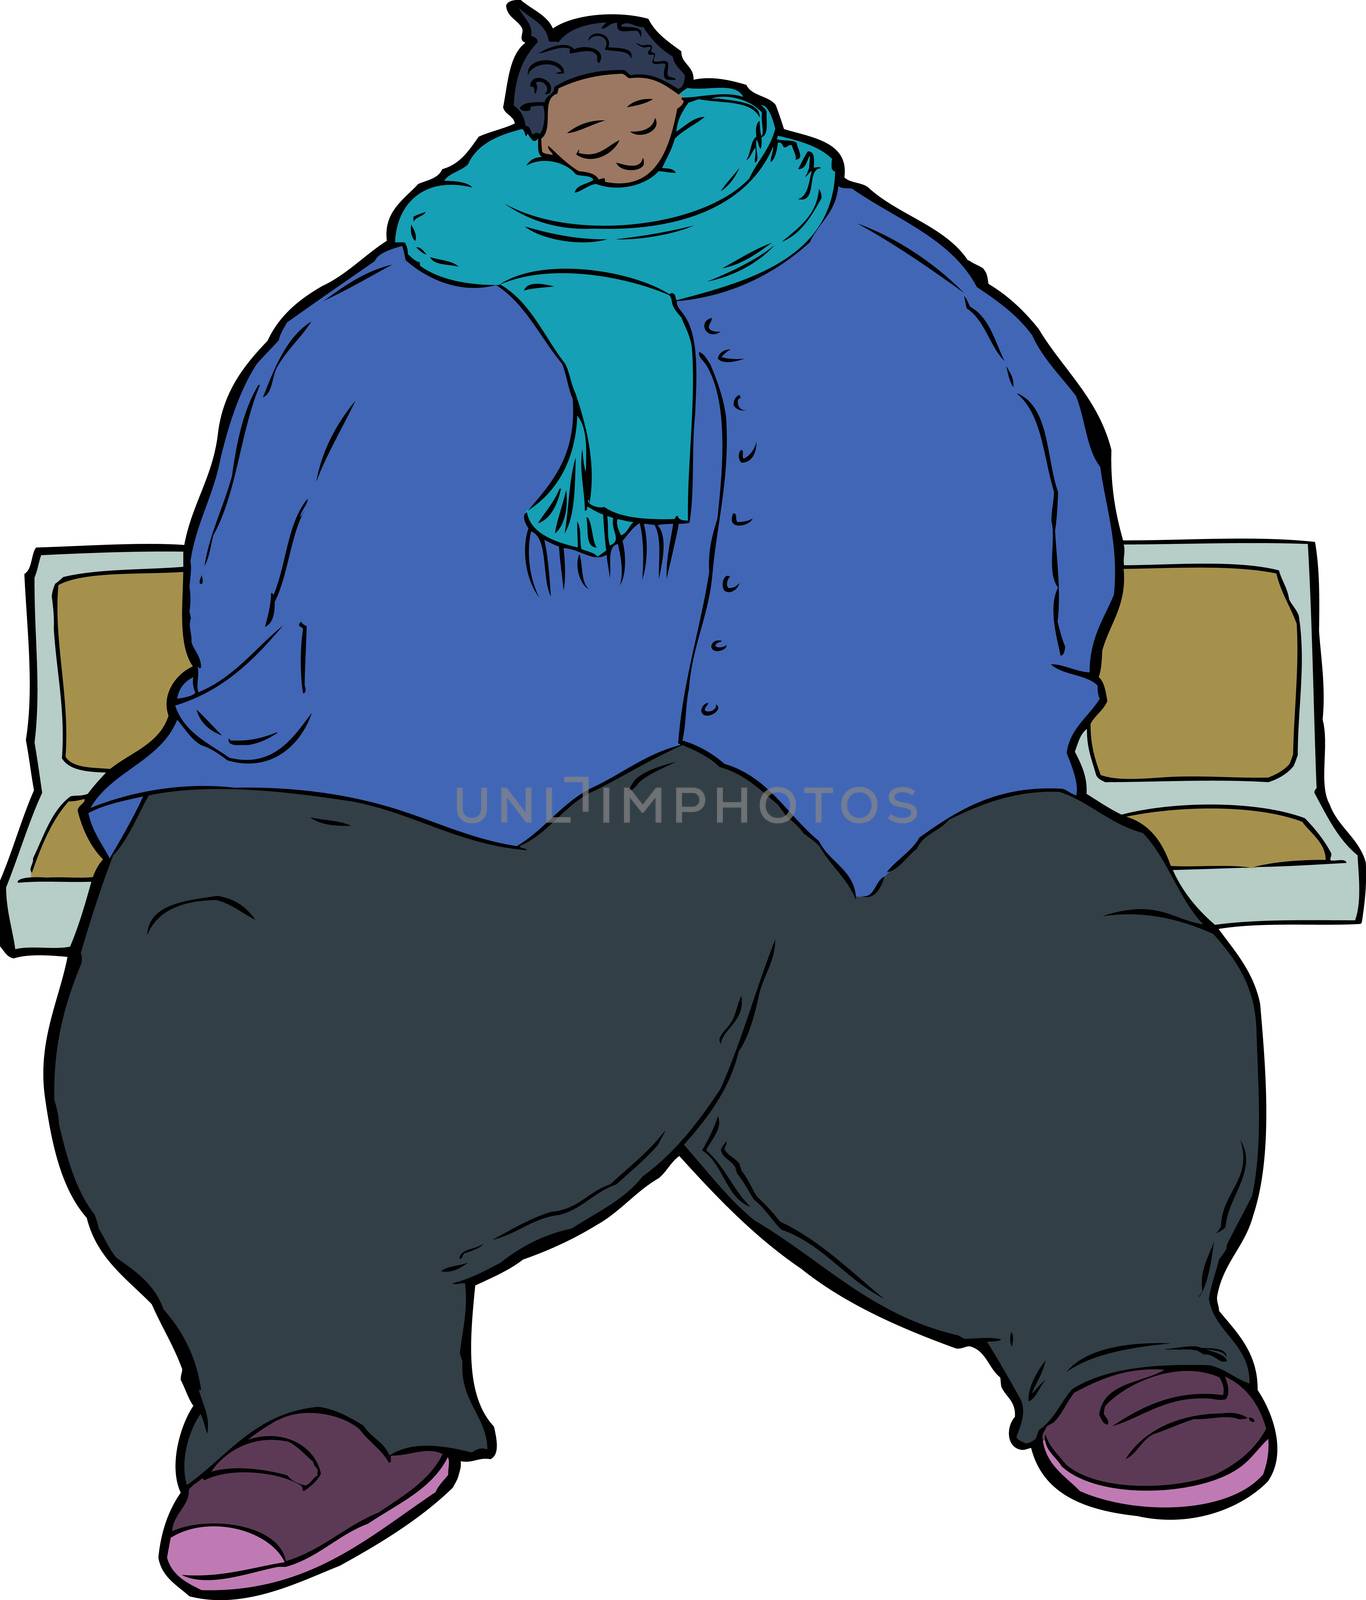 Cartoon of single sleeping obese woman clothed in jacket and scarf while seated in train seats